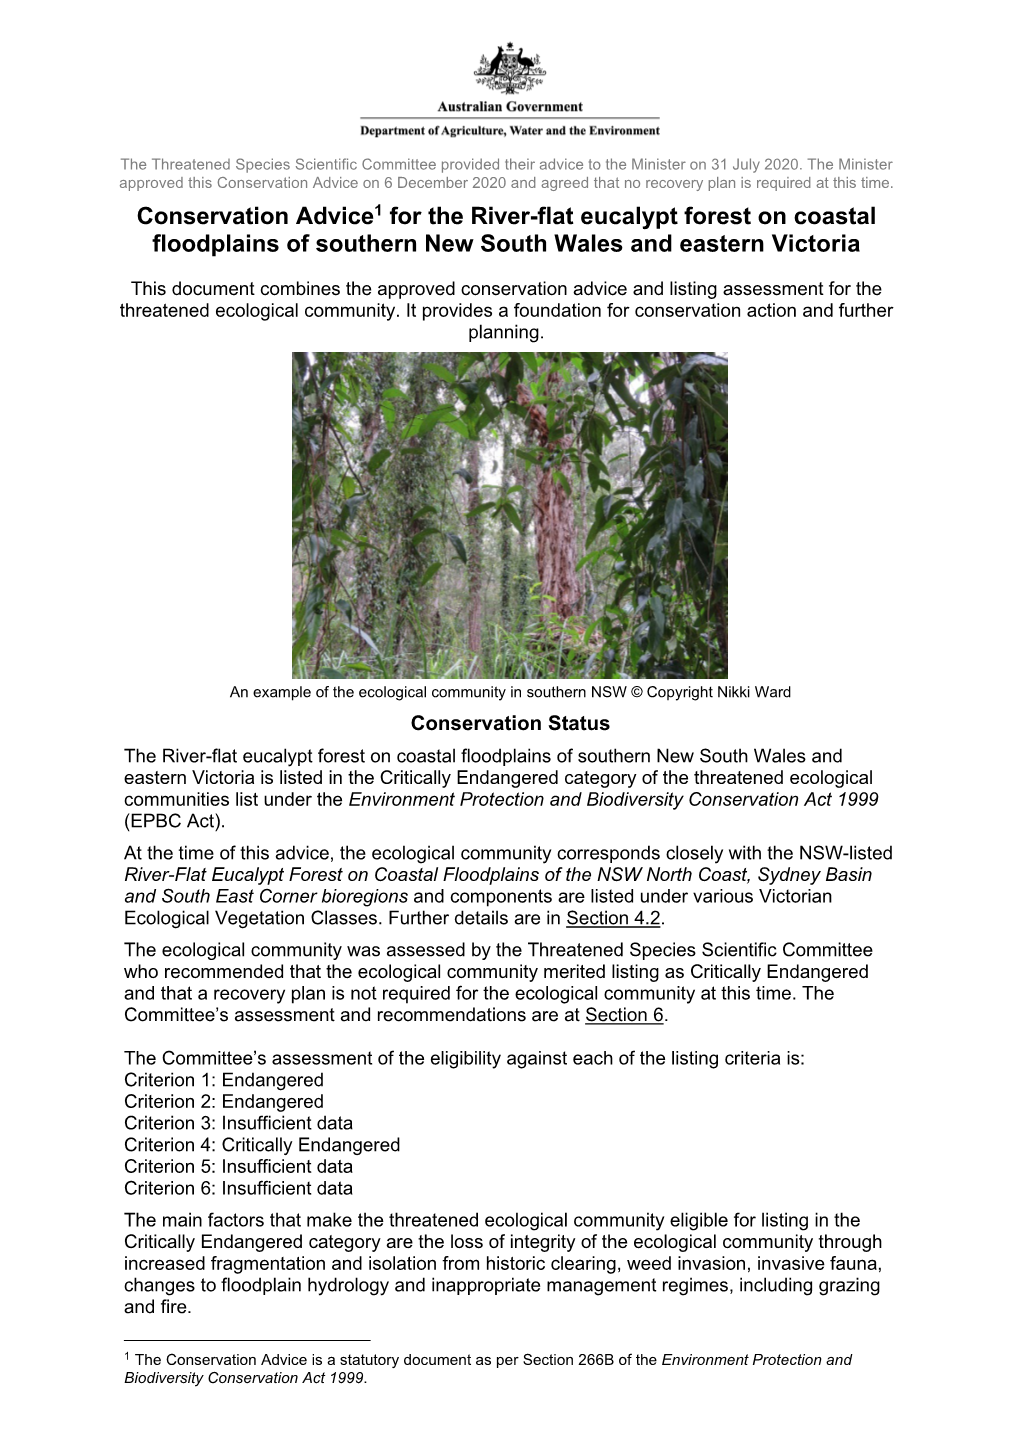 Conservation Advice for the River-Flat Eucalypt Forest on Coastal Floodplains of Southern New South Wales and Eastern.”